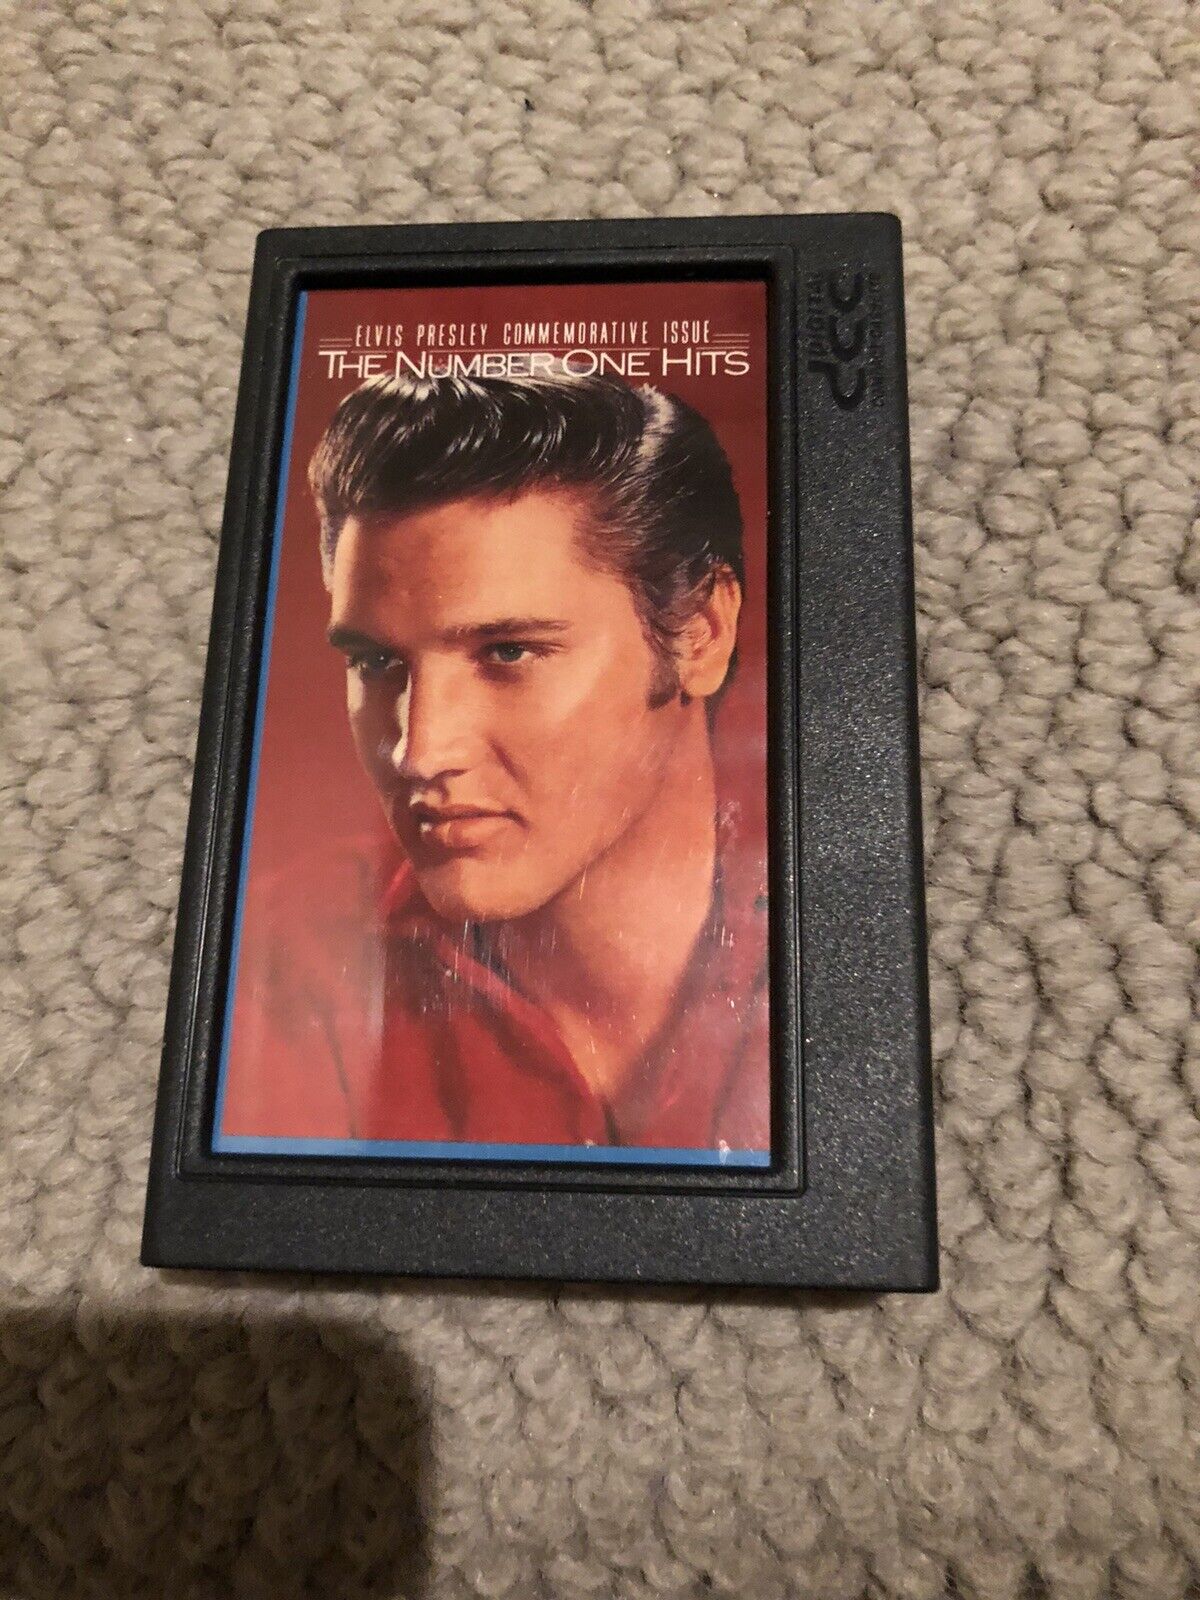 Elvis Presley- The Number One Digital Hits- Max 63% OFF 25% OFF Cassette DC Compact